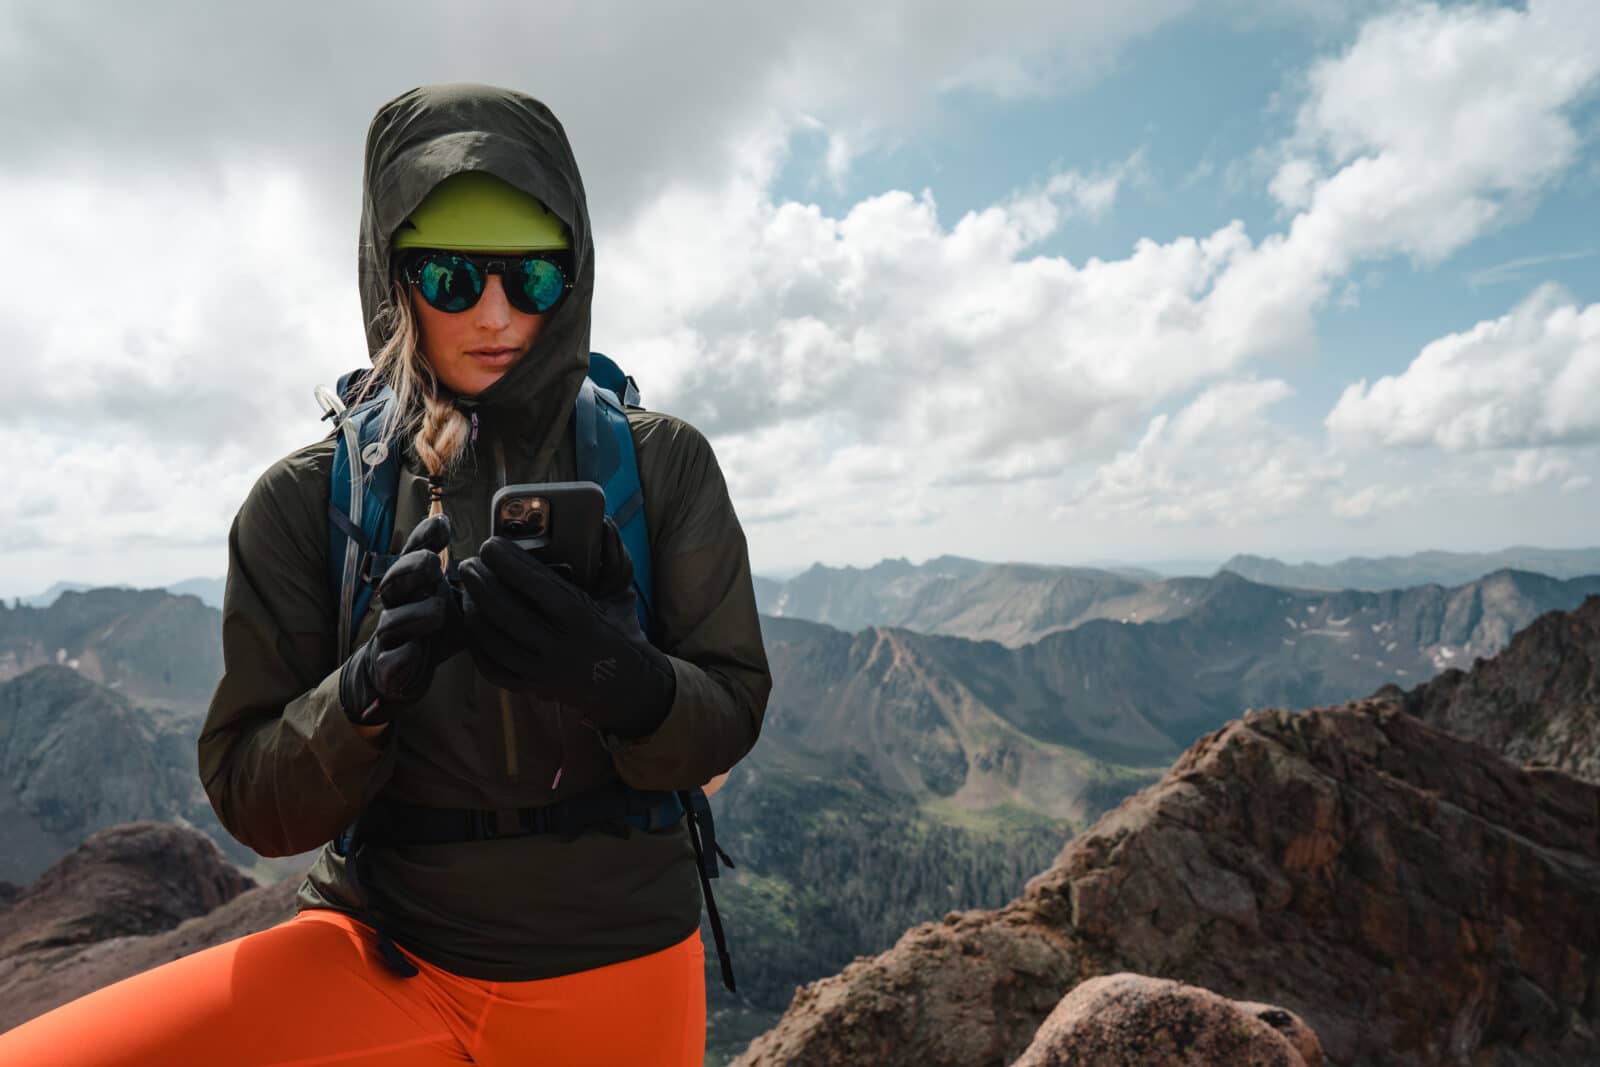 onX Backcountry Cost & Pricing Structure | onX